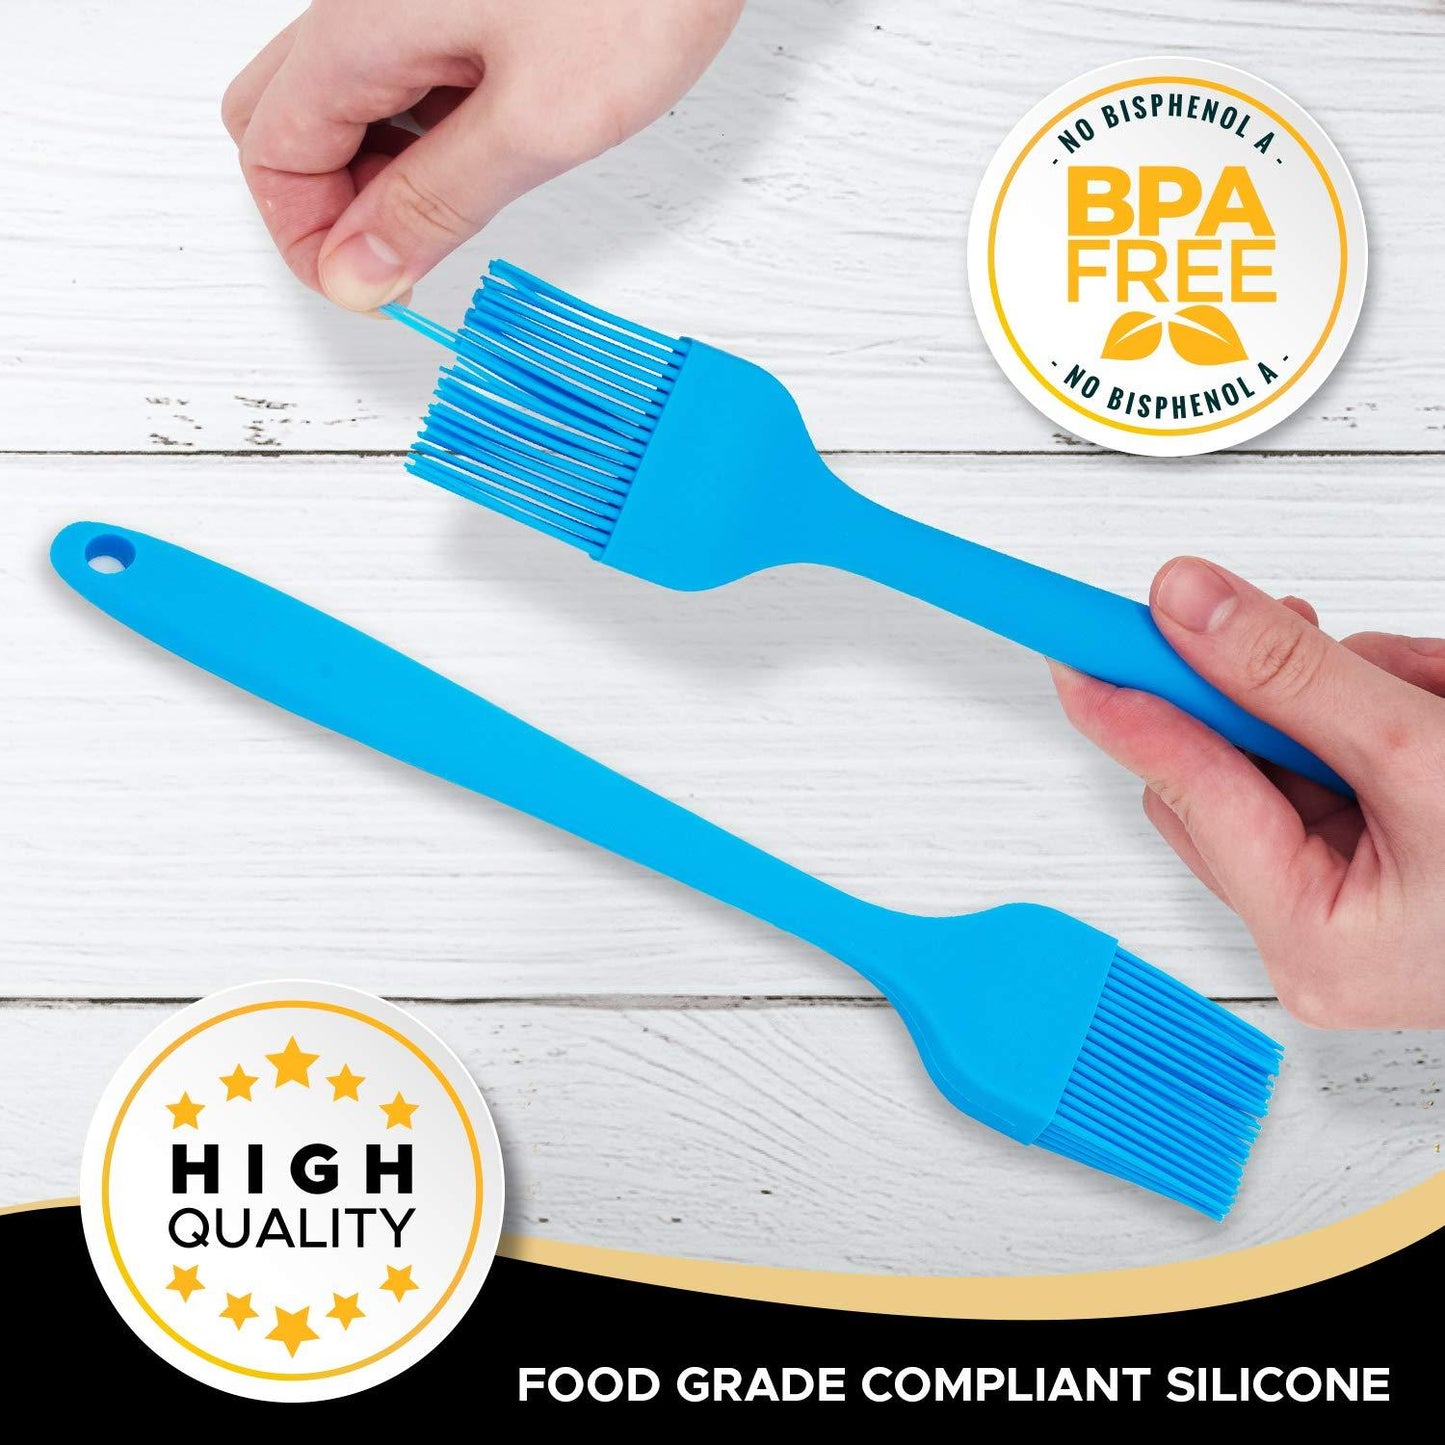 Ignite Lifestyle Silicone Pastry Brush - 2pcs Basting Brush for Cooking, Baking & BBQ - Easy to Clean Grill Brush - Heat Resistant Silicone Brush - Basting Brushes Kitchen - BBQ Brush - Large & Small - CookCave